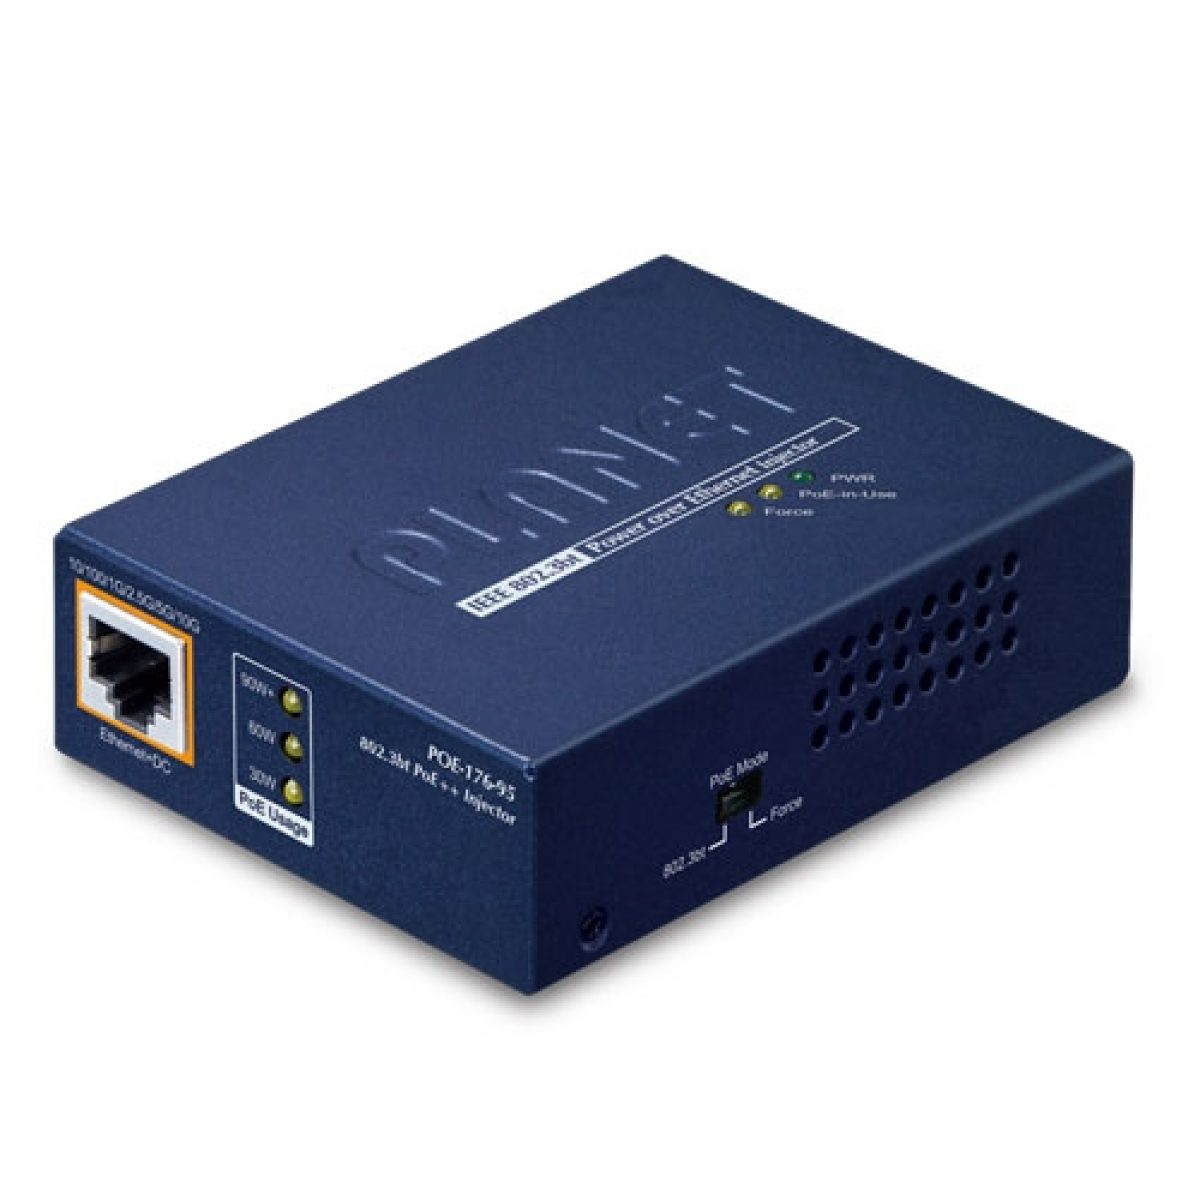 POE-175-95 One-Port 10/100/1000Mbps 802.3bt PoE++ Injector - Planet  Technology USA